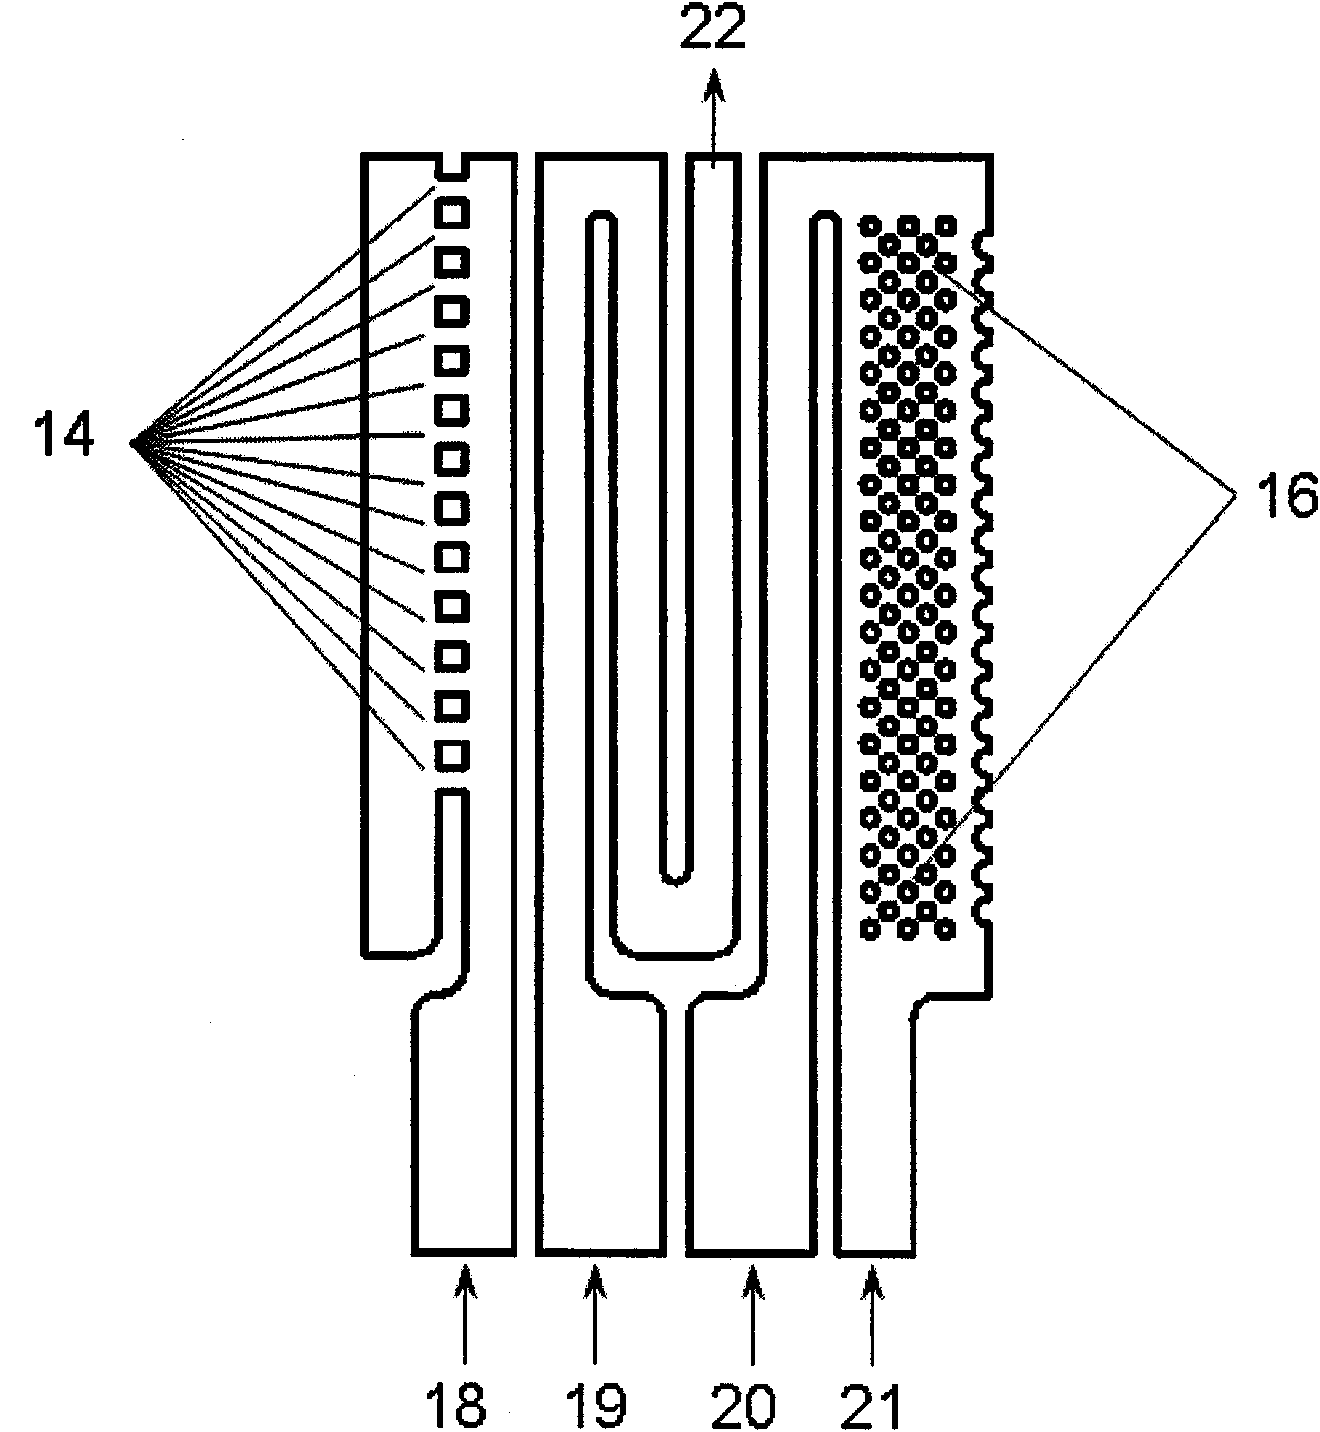 Gas turbine cooling blade with crown